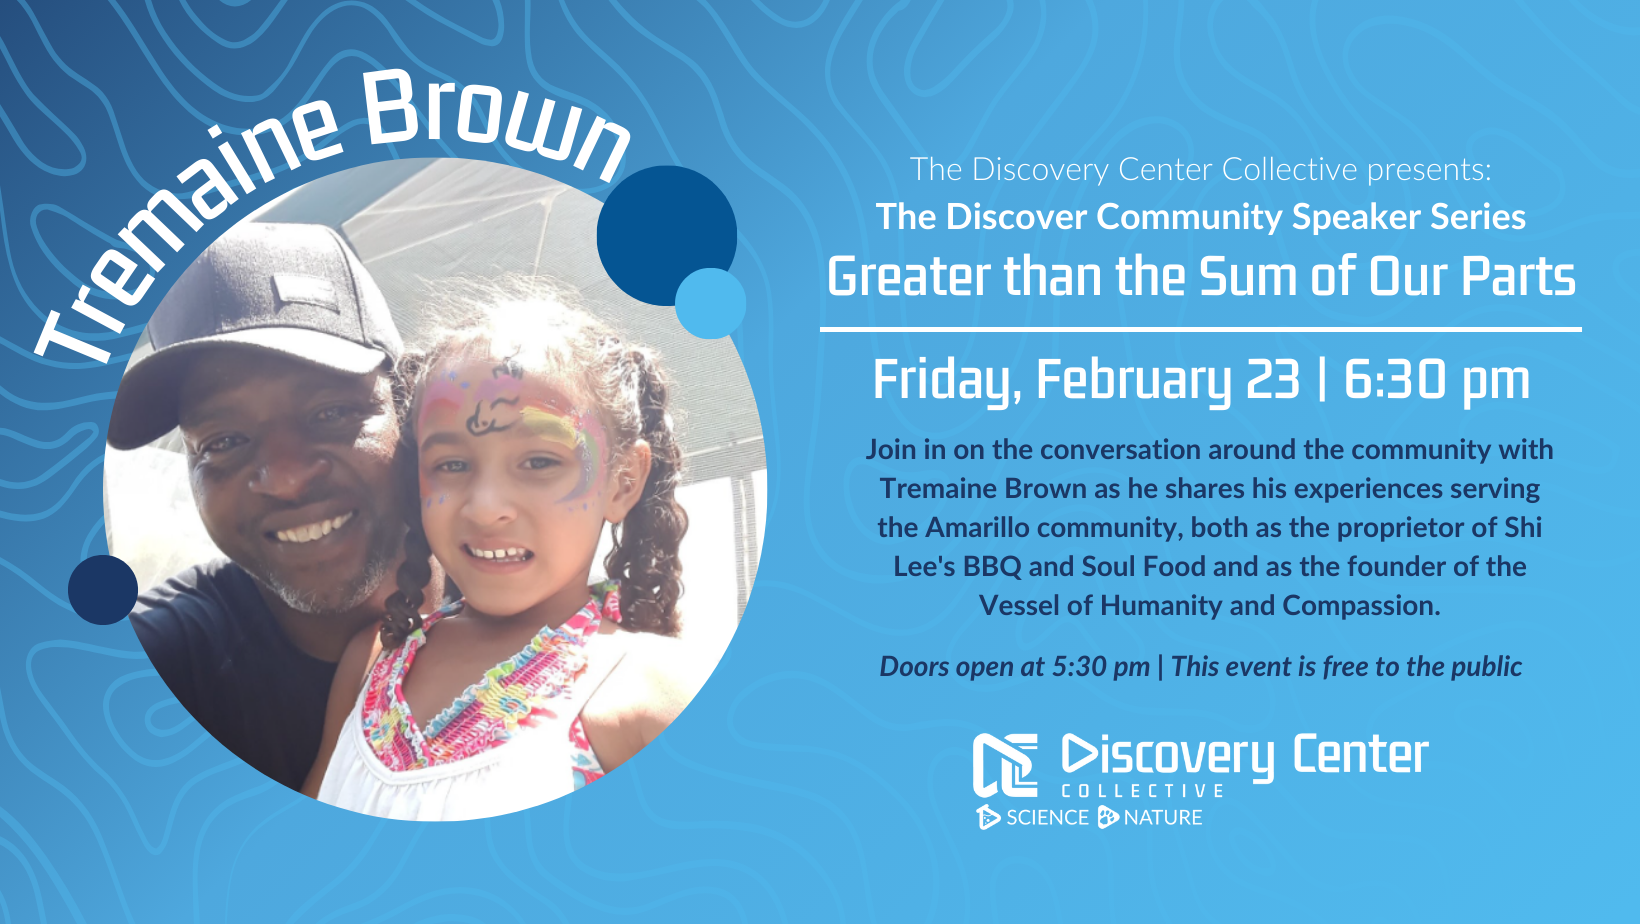 Discover Community Speaker Series: Tremaine Brown